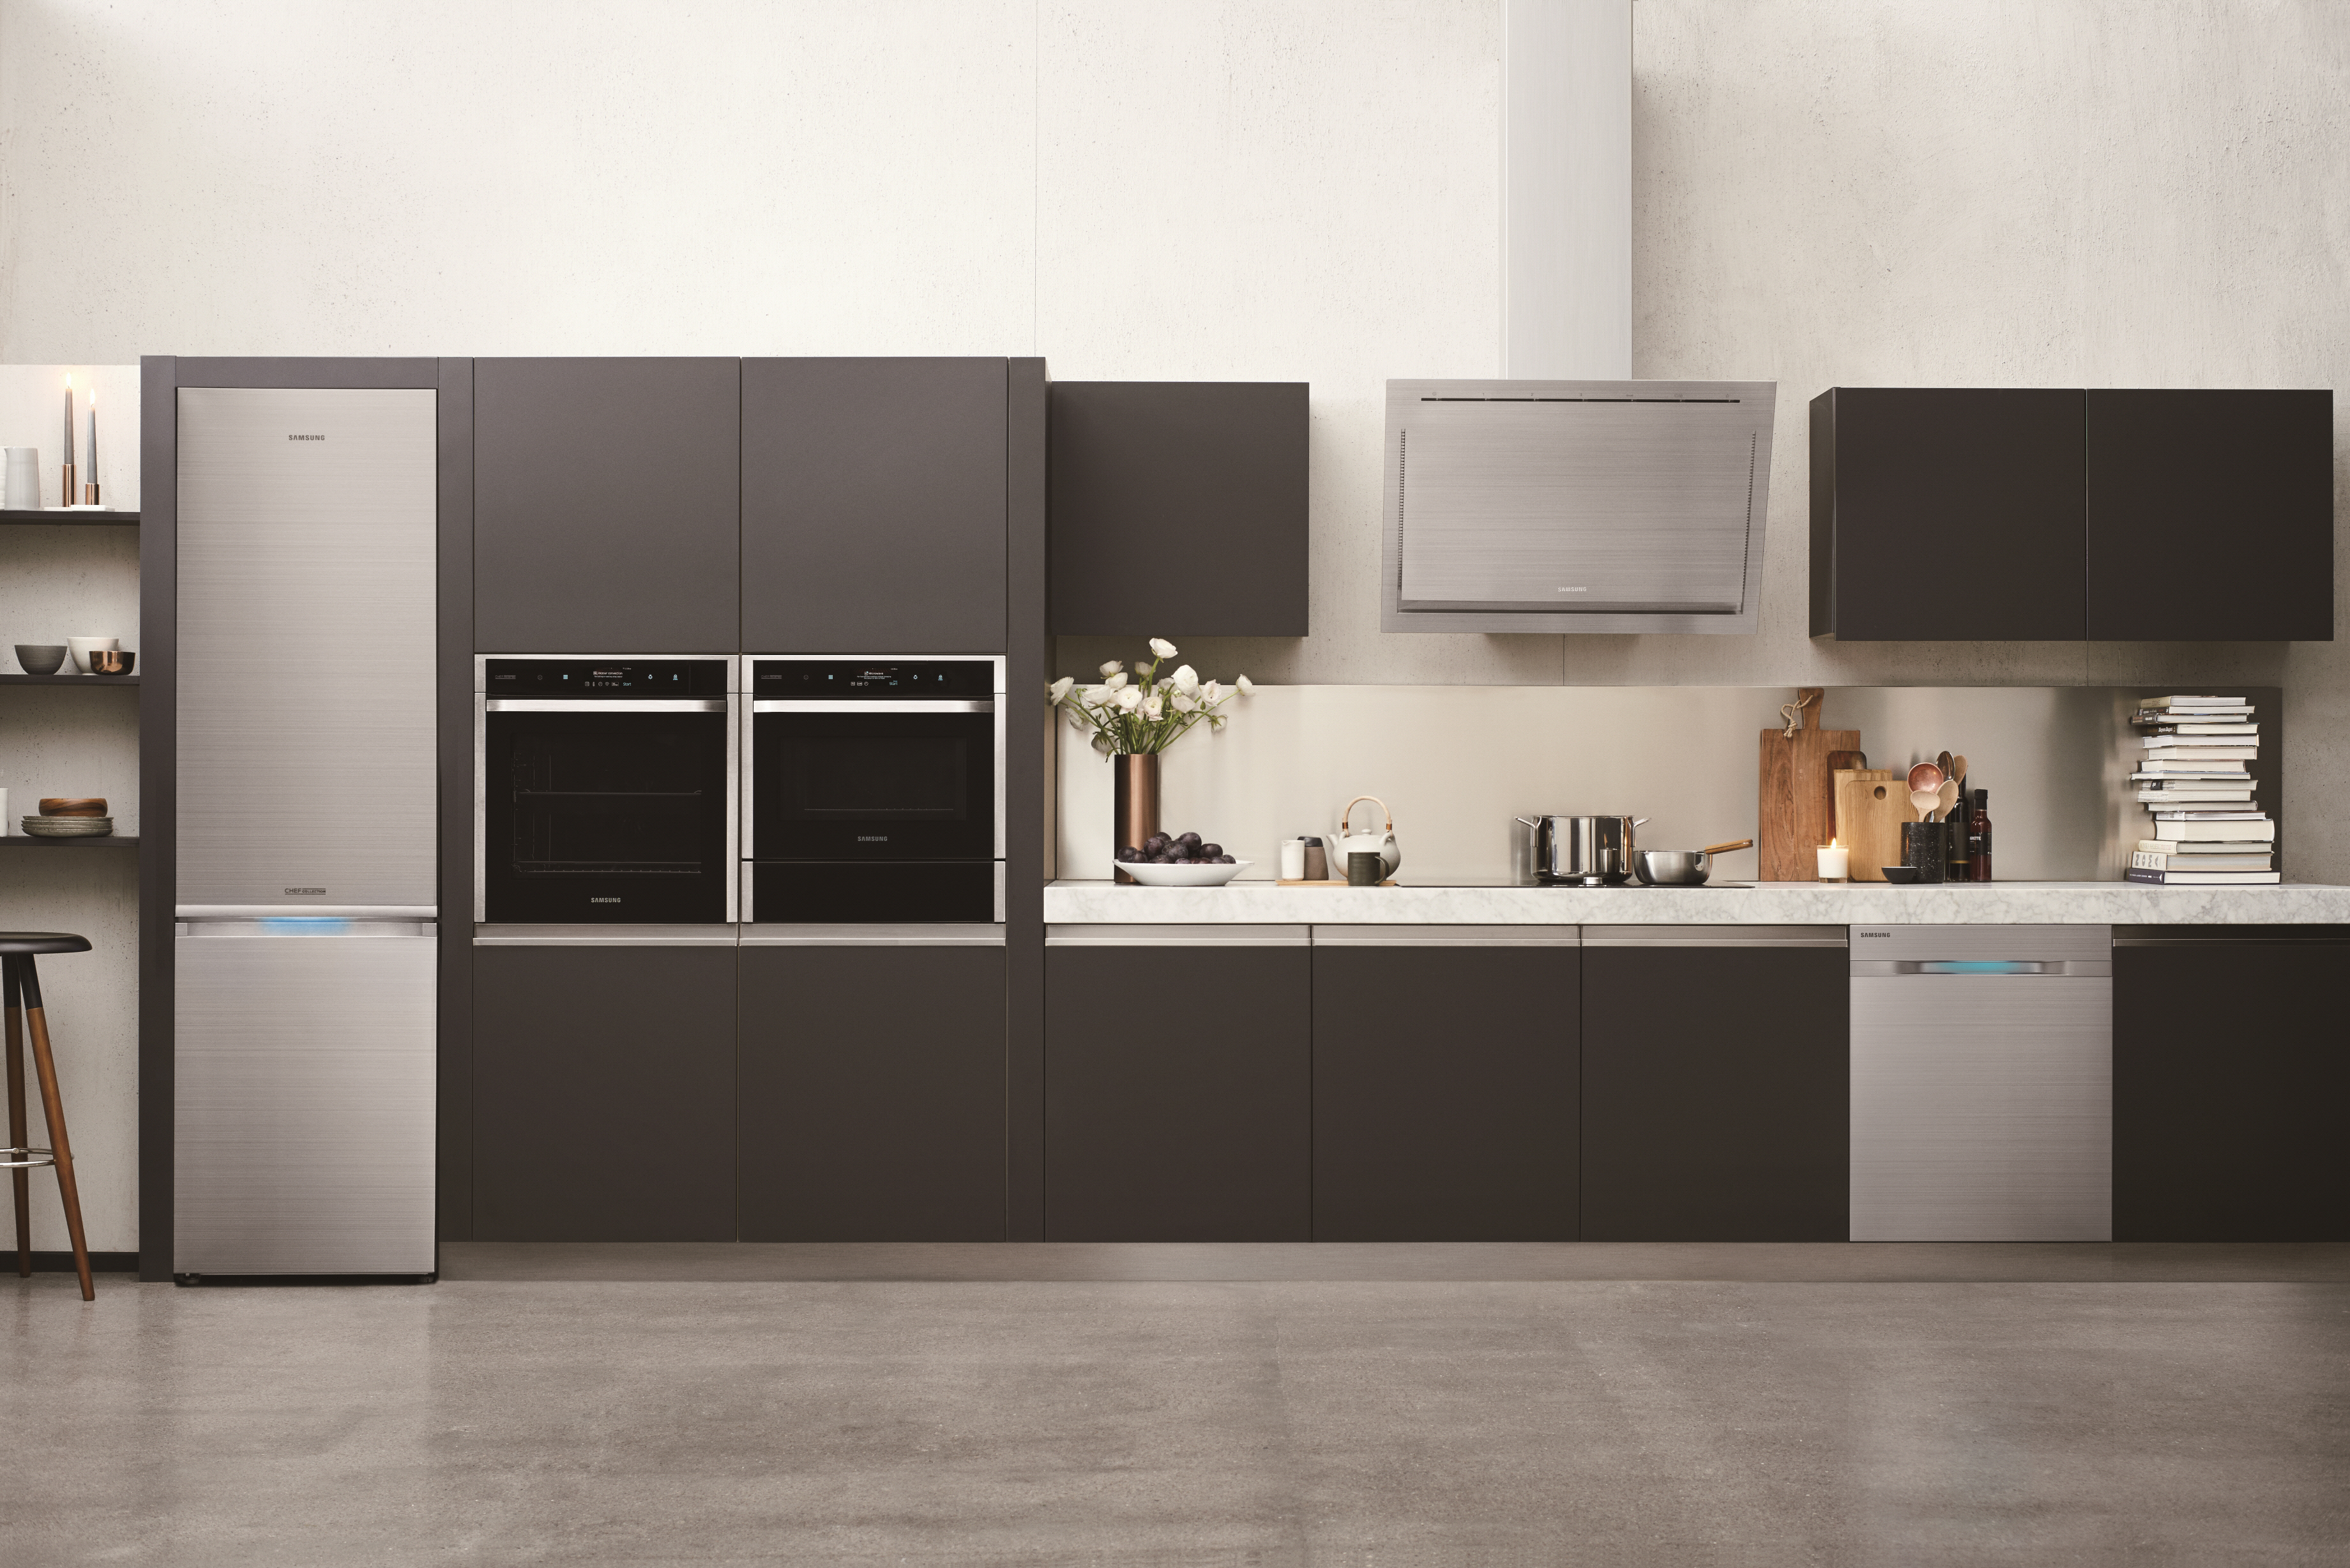 Samsung Unveils Three New Built In Kitchen Appliance Lineups Designed For The Contemporary European Consumer Samsung Newsroom Global Media Library